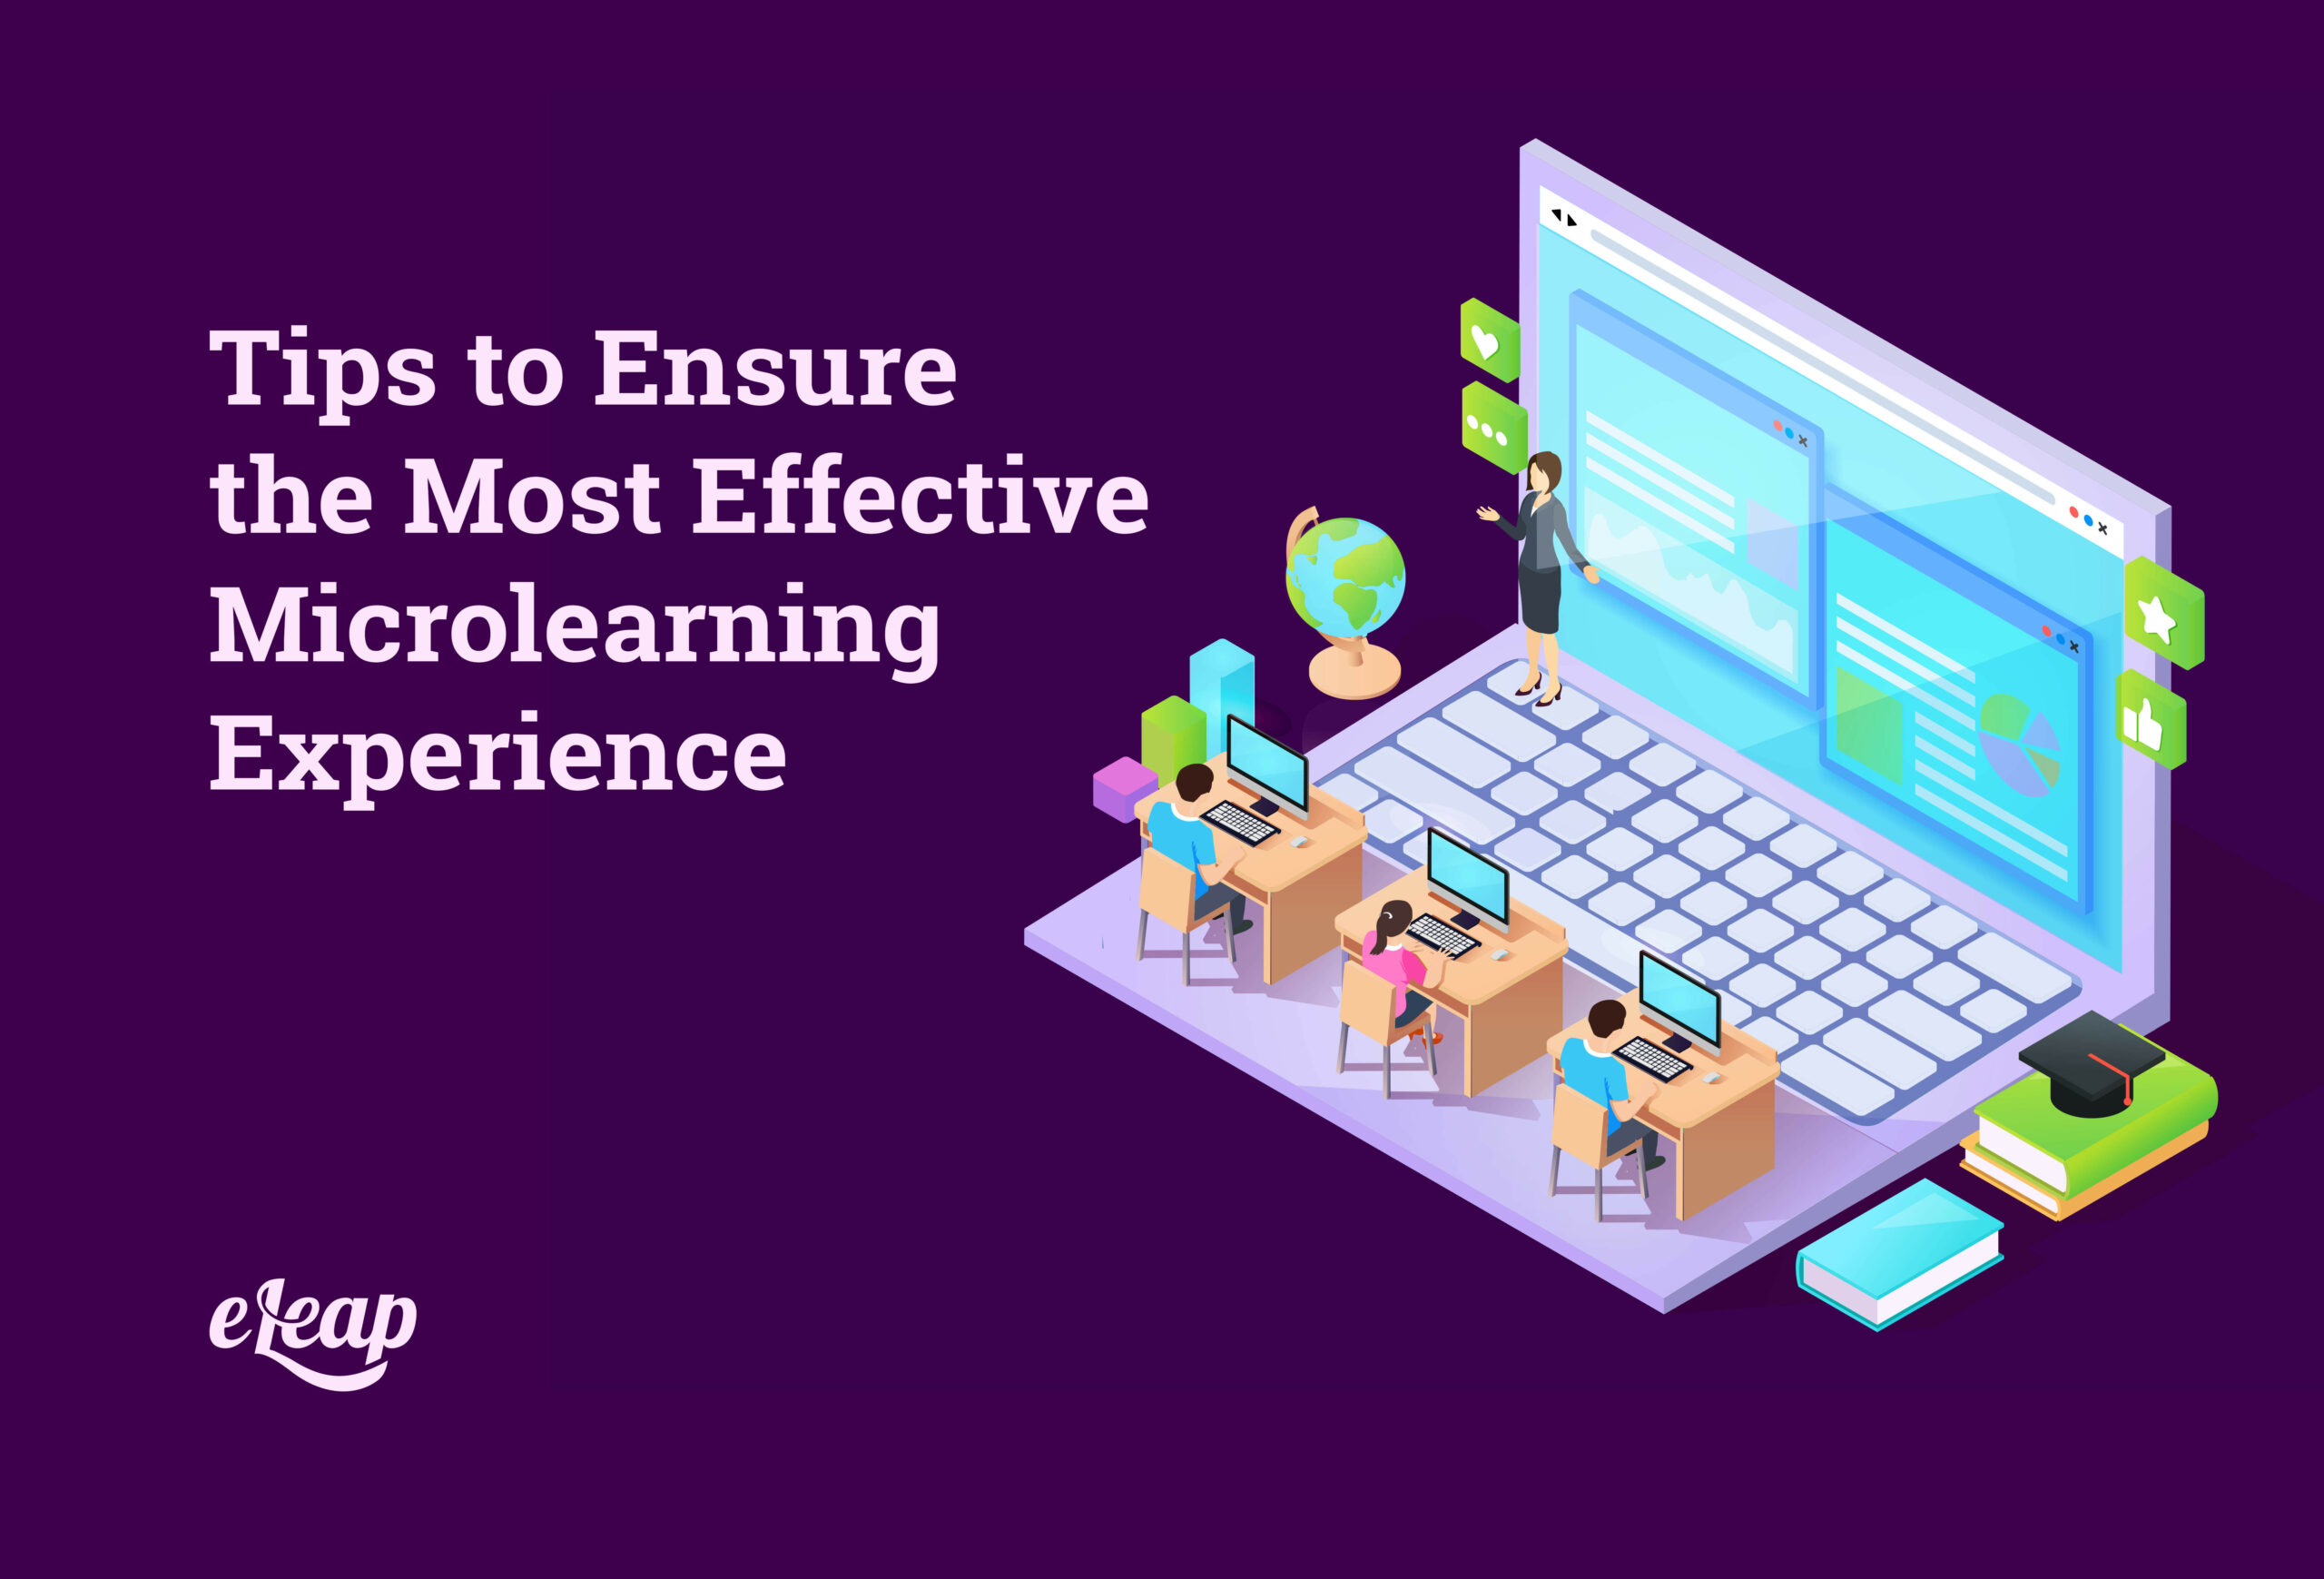 Tips to Ensure the Most Effective Microlearning Experience